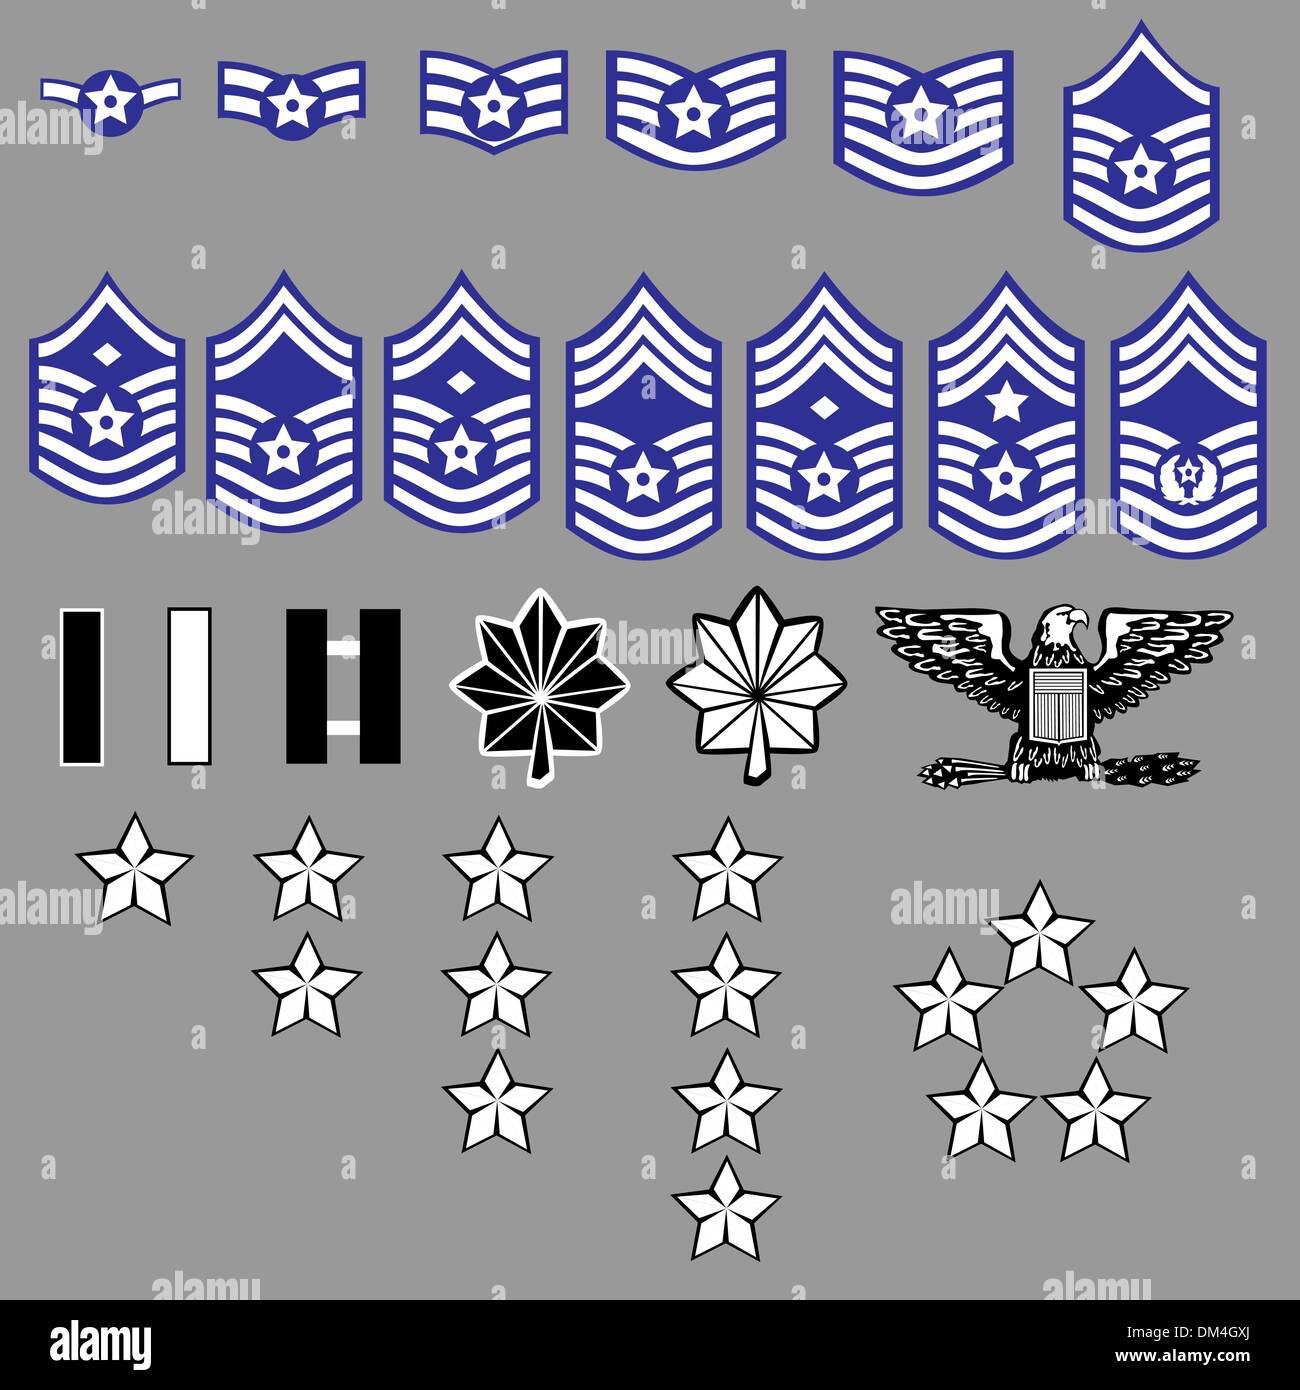 United States Air Force Enlisted Rank Insignia | lupon.gov.ph